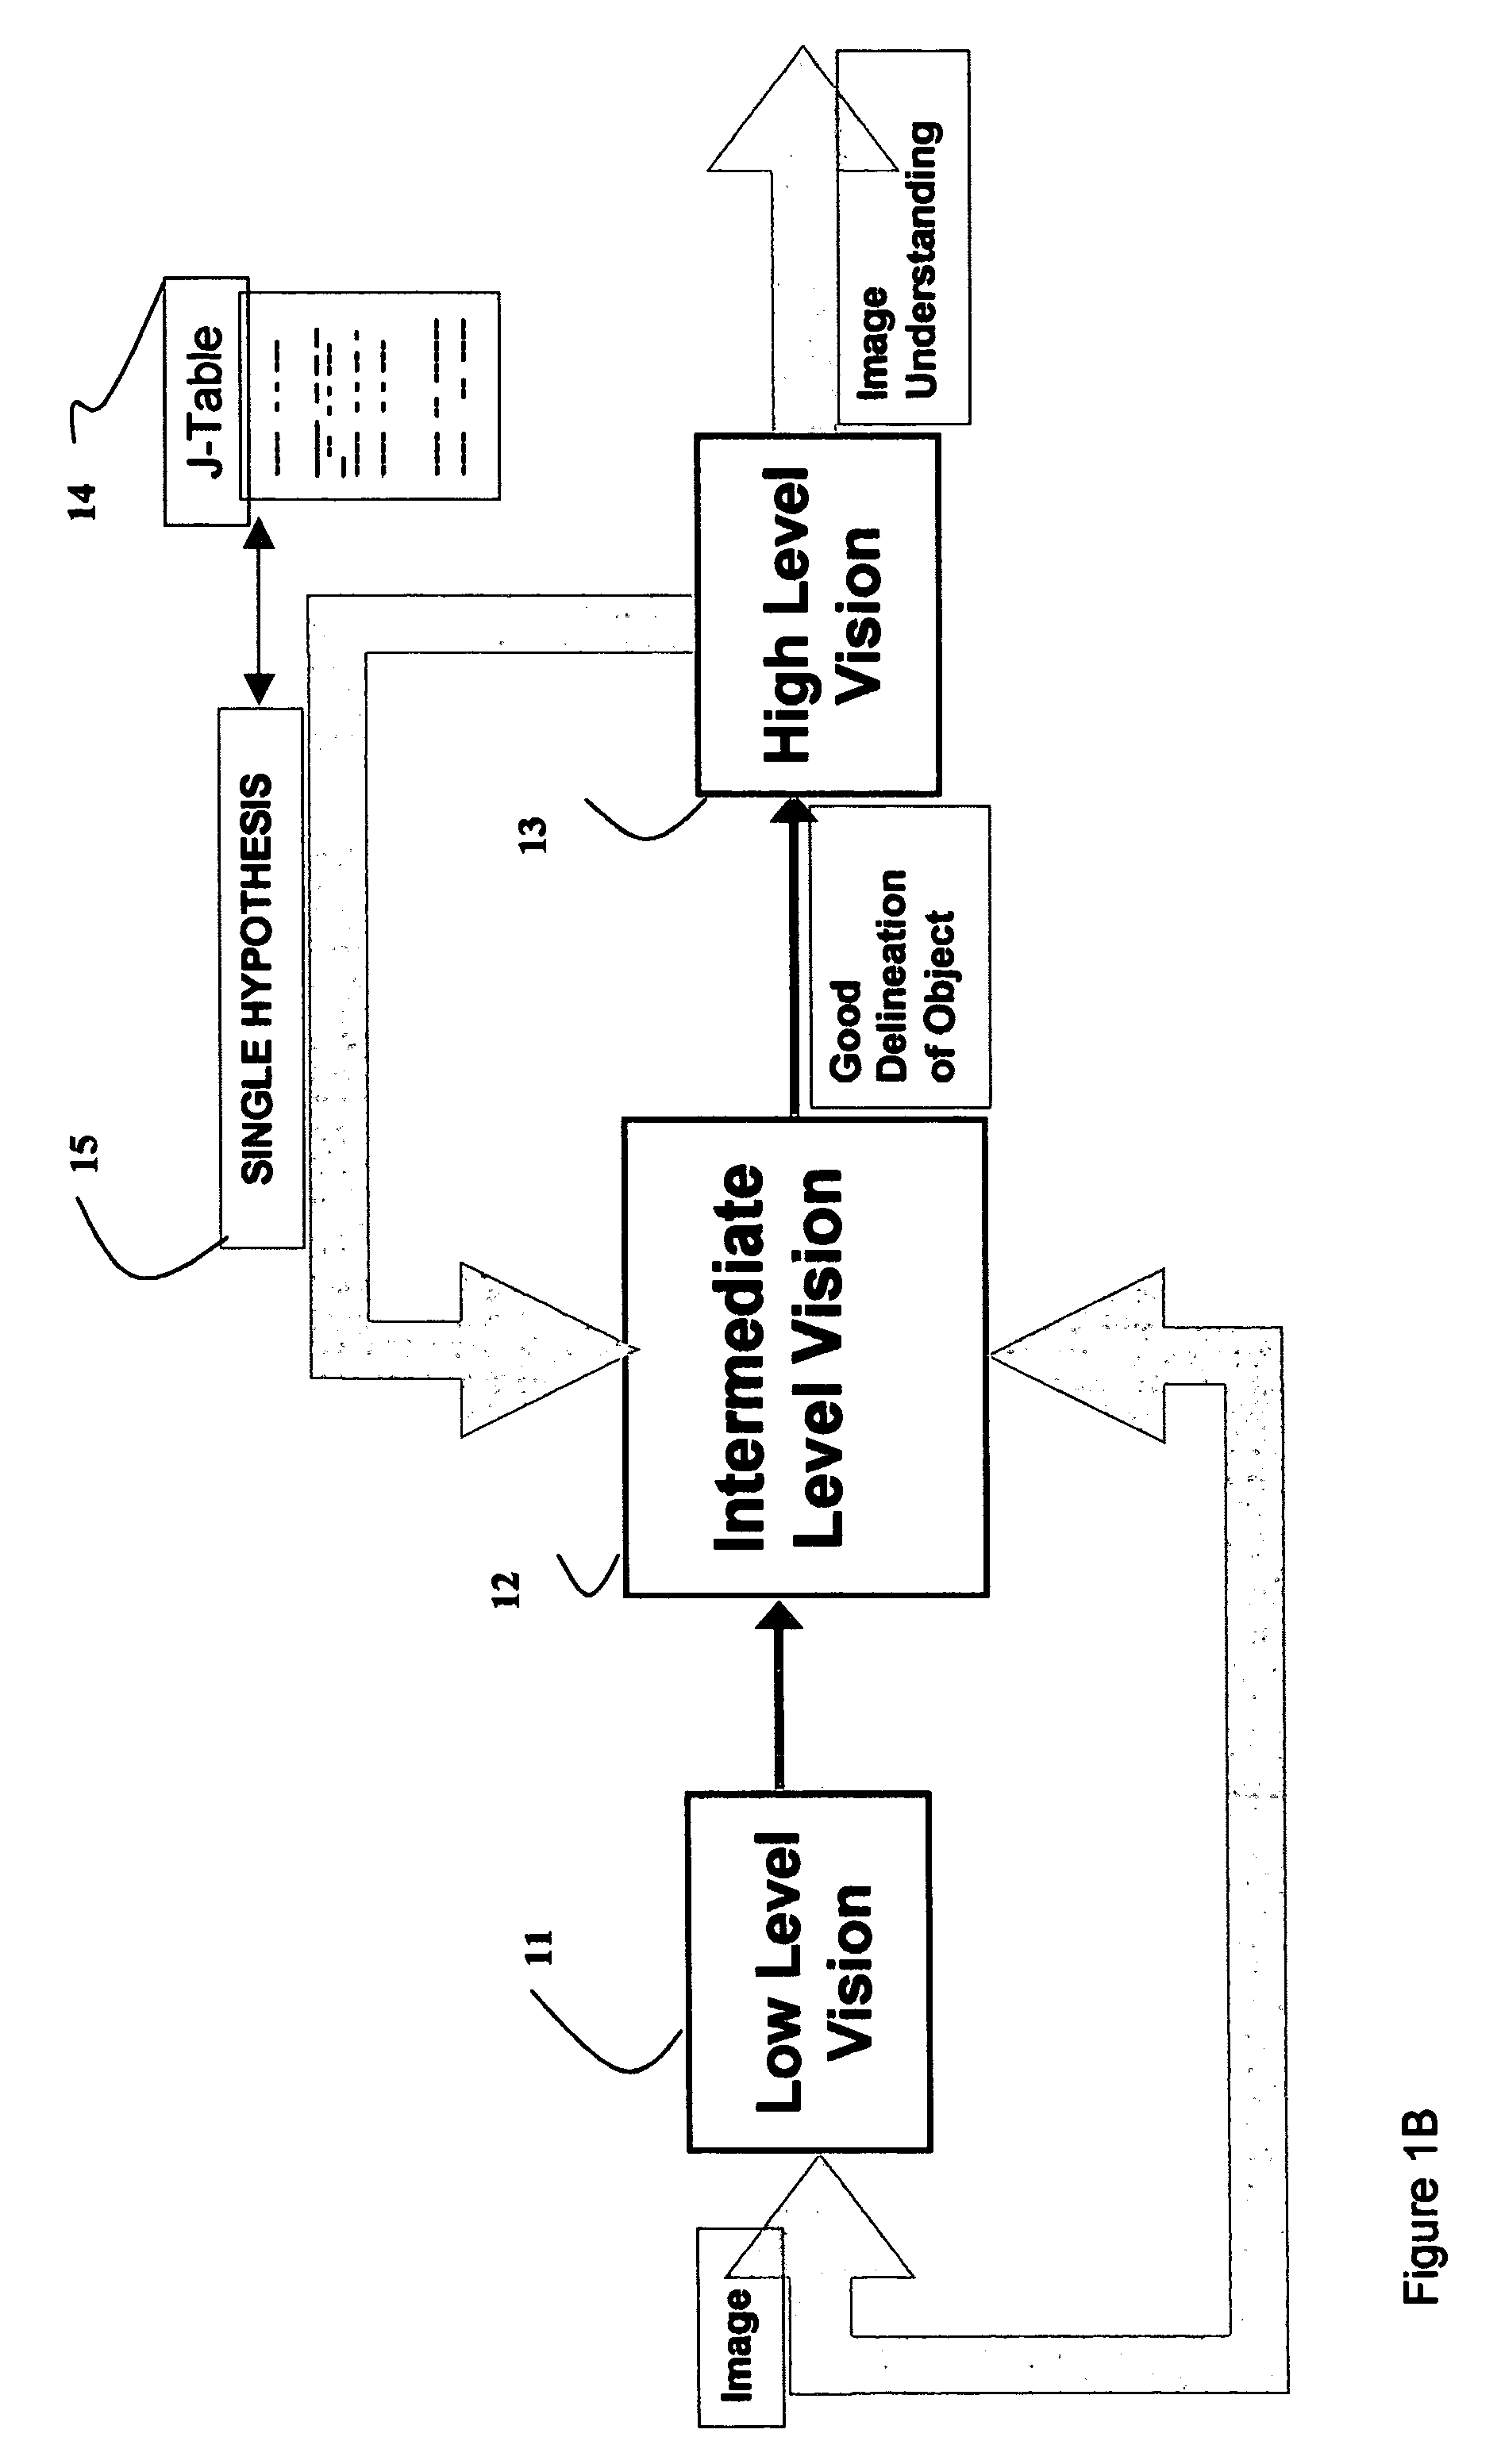 Hypothesis support mechanism for mid-level visual pattern recognition